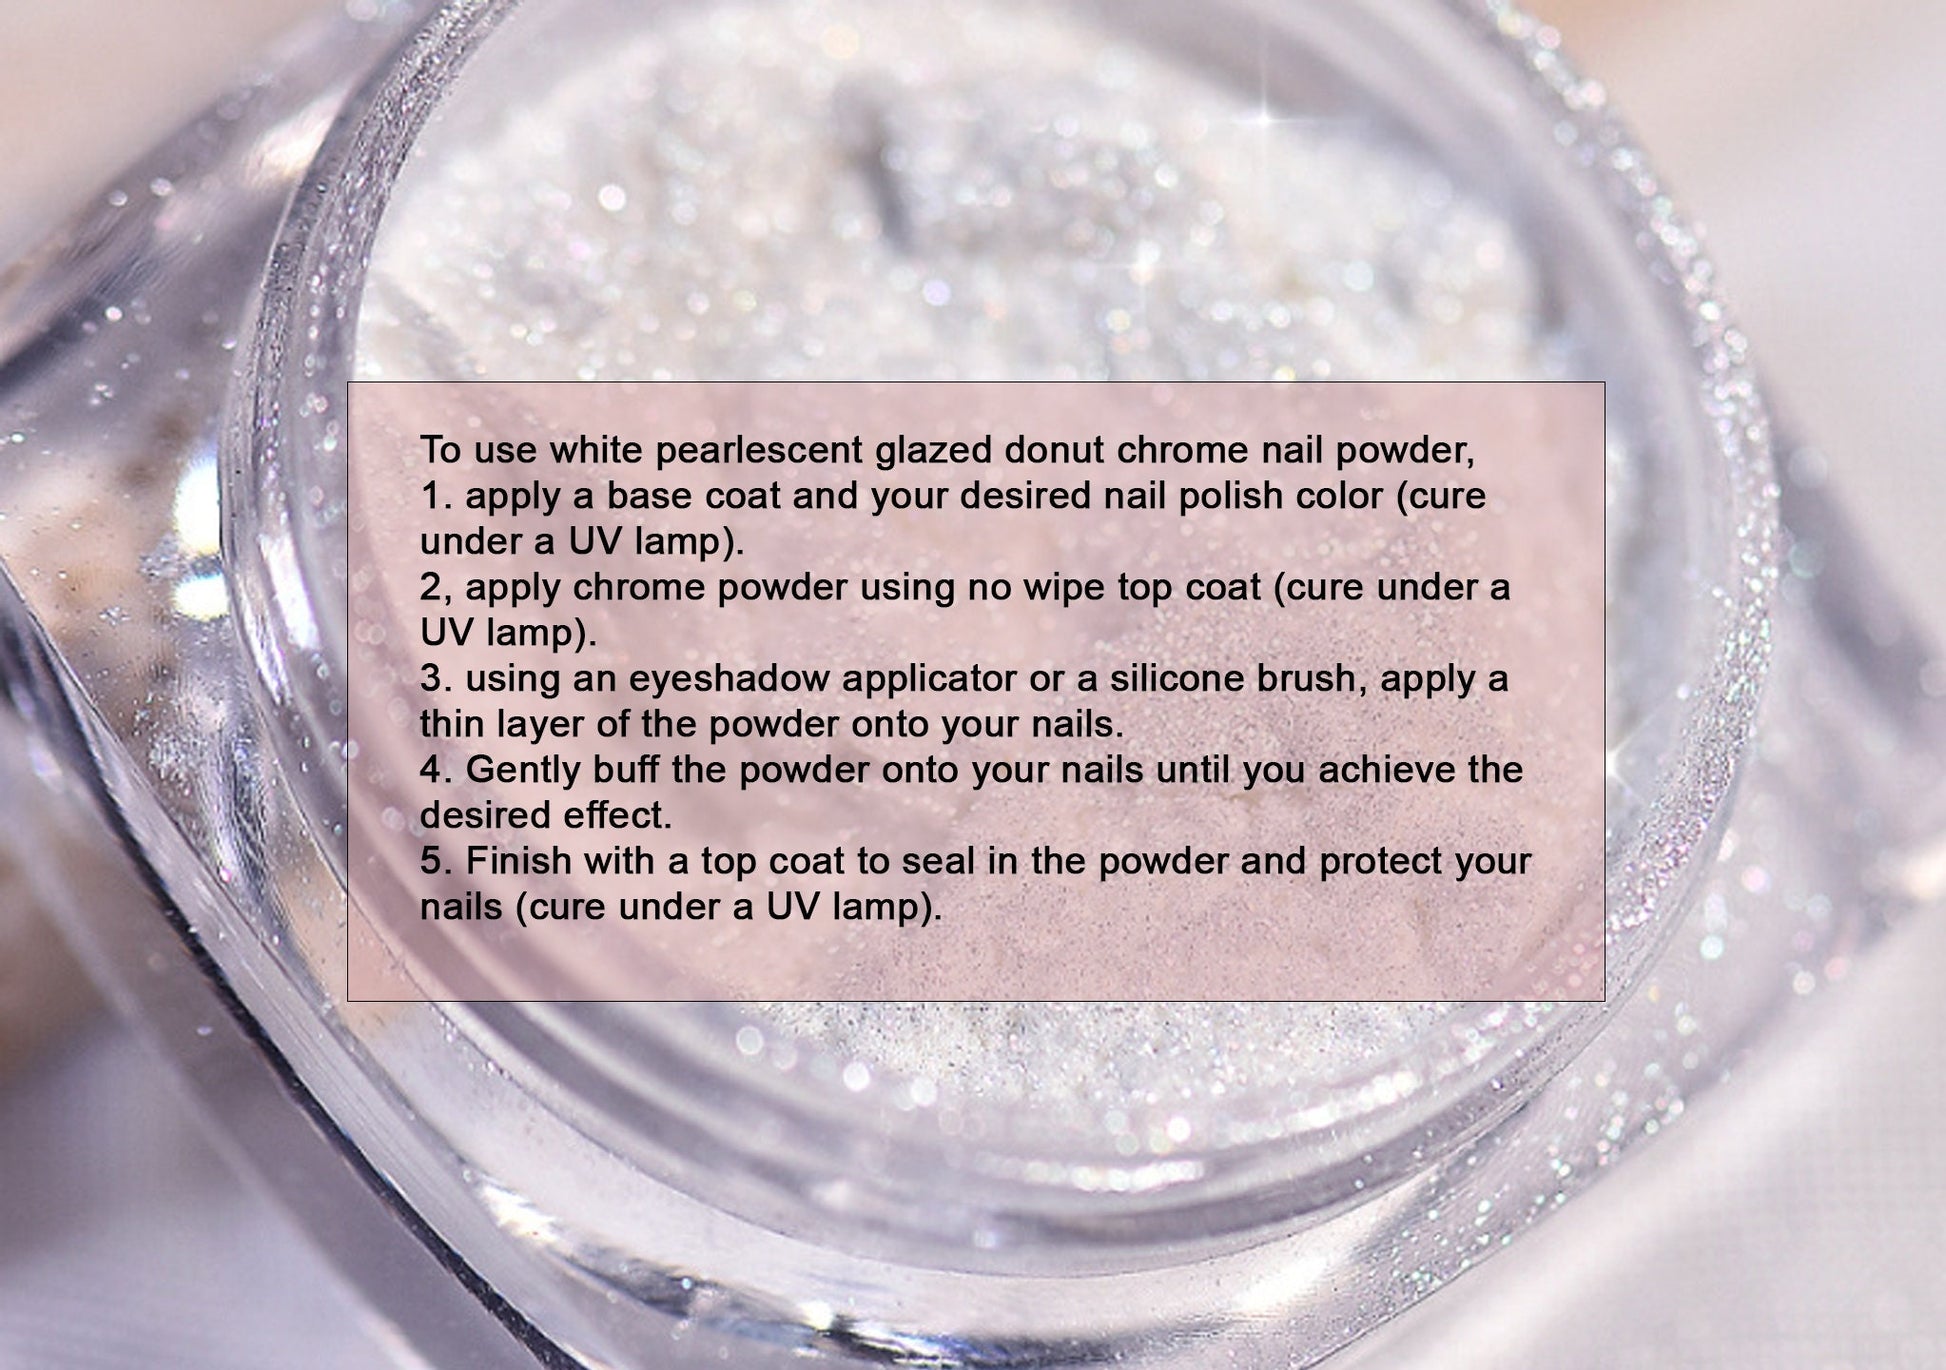 White Pearlescent Glow Chrome Nail Powder Mirror Effect/ Glazed Donut Nails Moonlight Effect Pigment Powder for Nail art